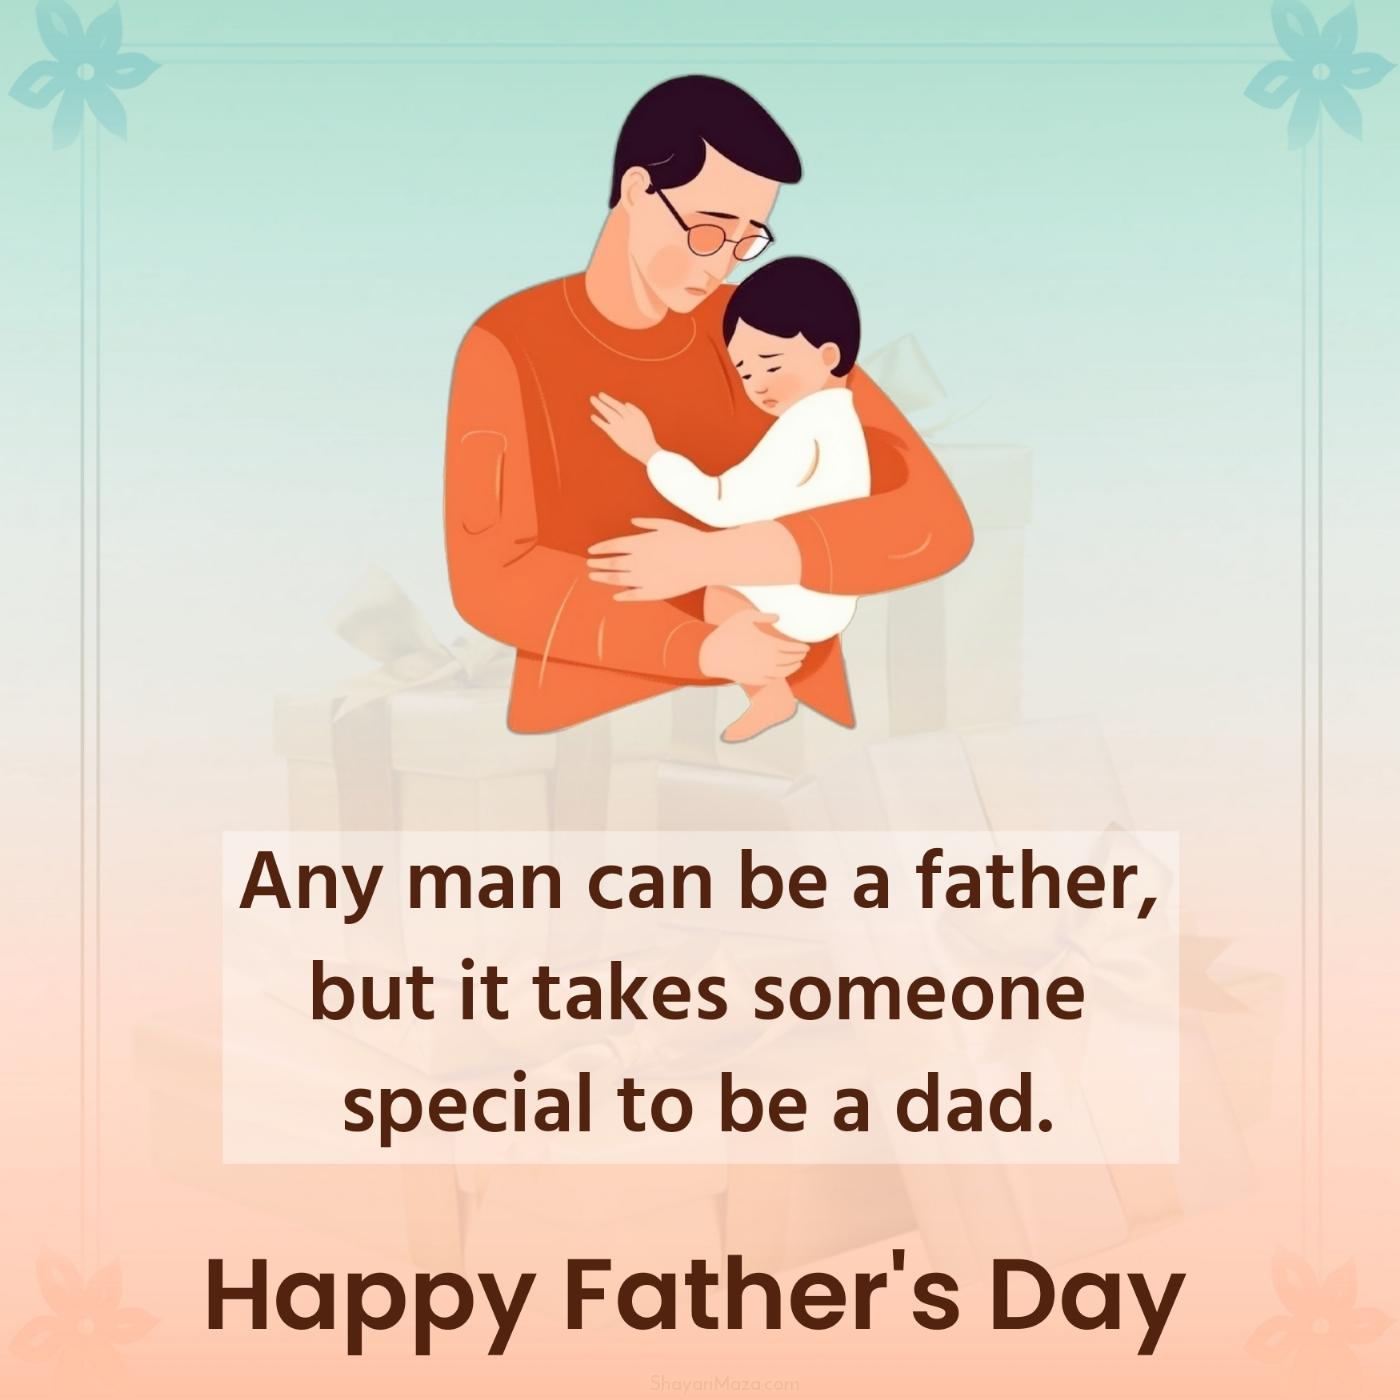 Any man can be a father but it takes someone special